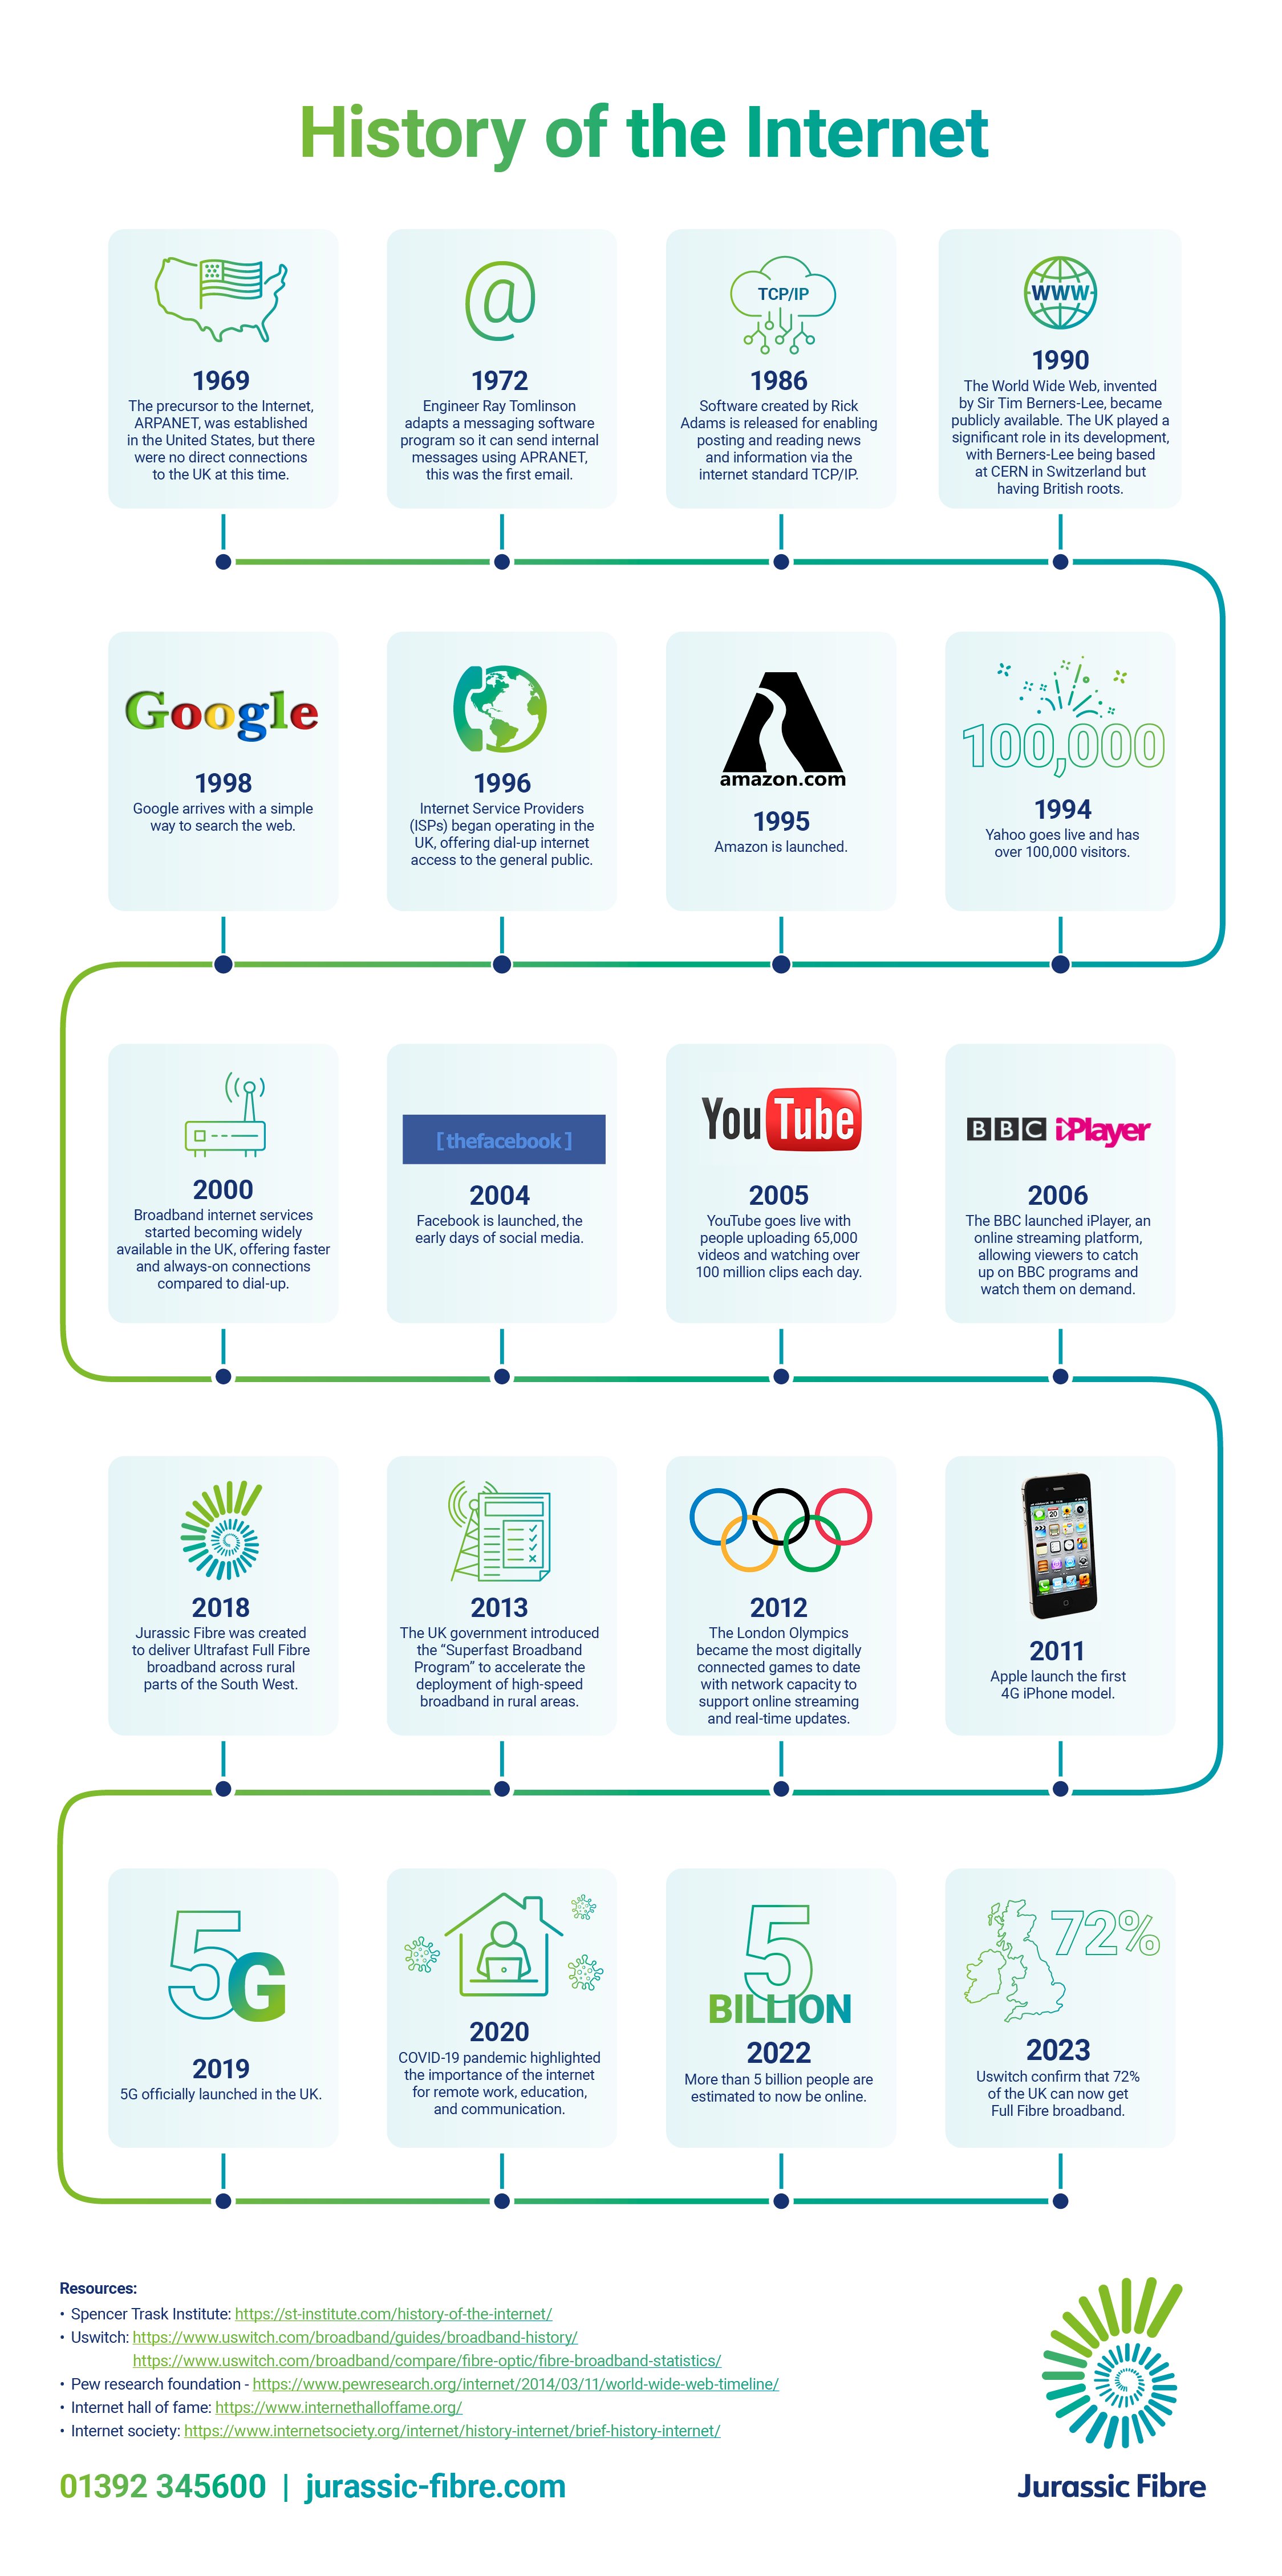 The history of the internet infographic